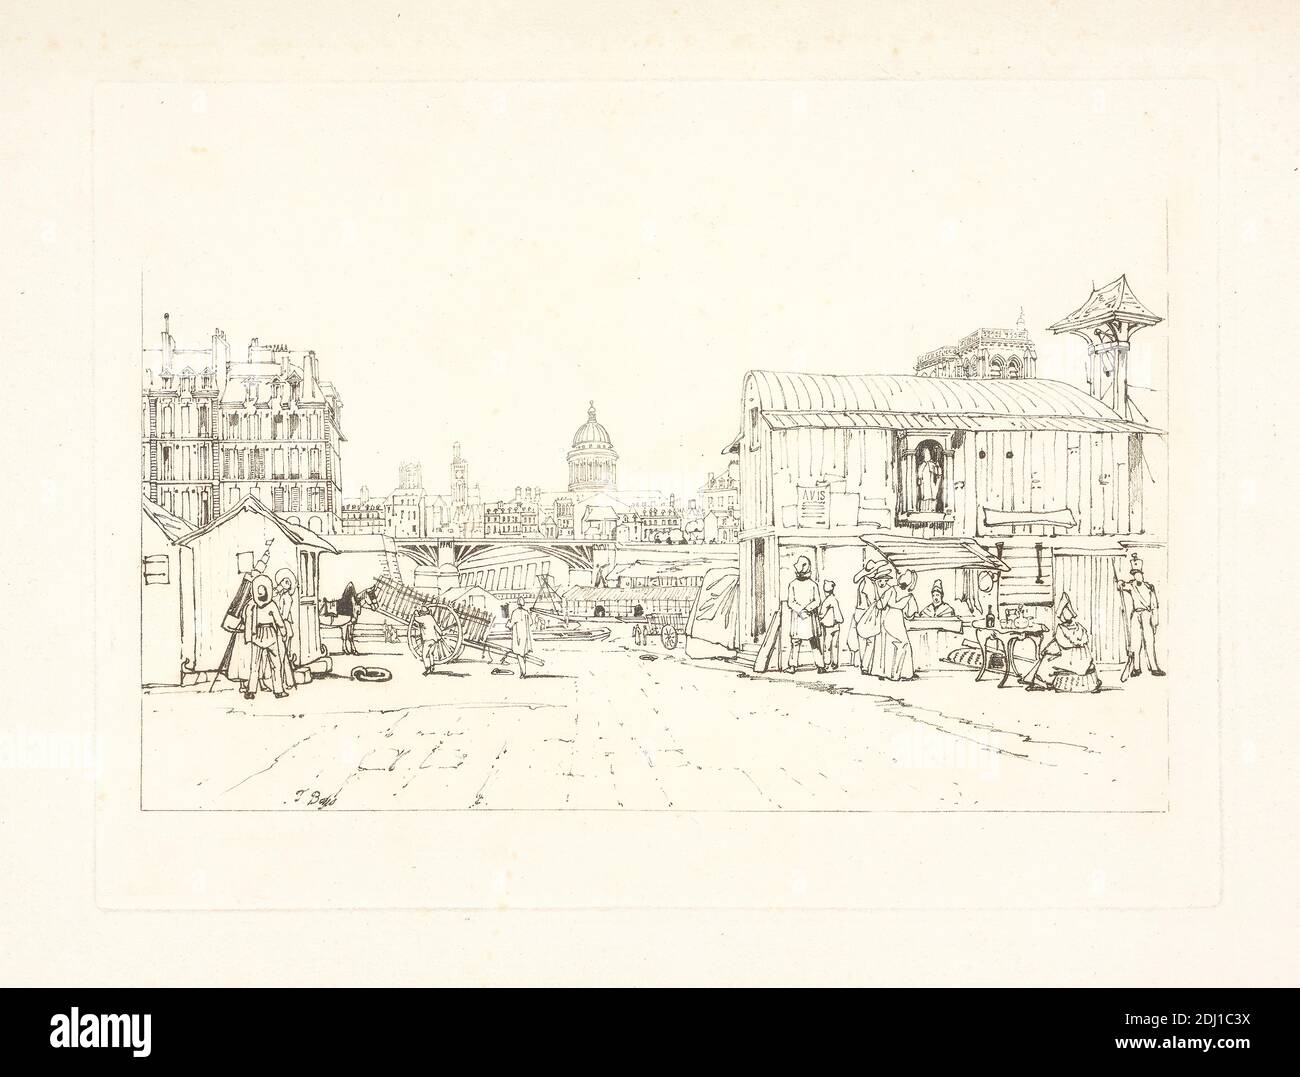 Quayside, Notre Dame in Distance, Print made by Thomas Shotter Boys, 1803–1874, British, undated, Soft-ground etching on moderately thick, slightly textured, cream wove paper, Sheet: 13 7/16 x 19 15/16 inches (34.2 x 50.6 cm), Plate: 9 3/16 x 12 1/2 inches (23.4 x 31.8 cm), and Image: 6 13/16 x 11 7/16 inches (17.3 x 29 cm), architectural subject, bags (containers), bell, bridge (built work), buildings, campanile, carts, cathedral, city, cityscape, coats, containers (receptacles), dome, dresses, figures, genre subject, Grand Tour, guard, hats, horse (animal), labor, market (event), marketplace Stock Photo